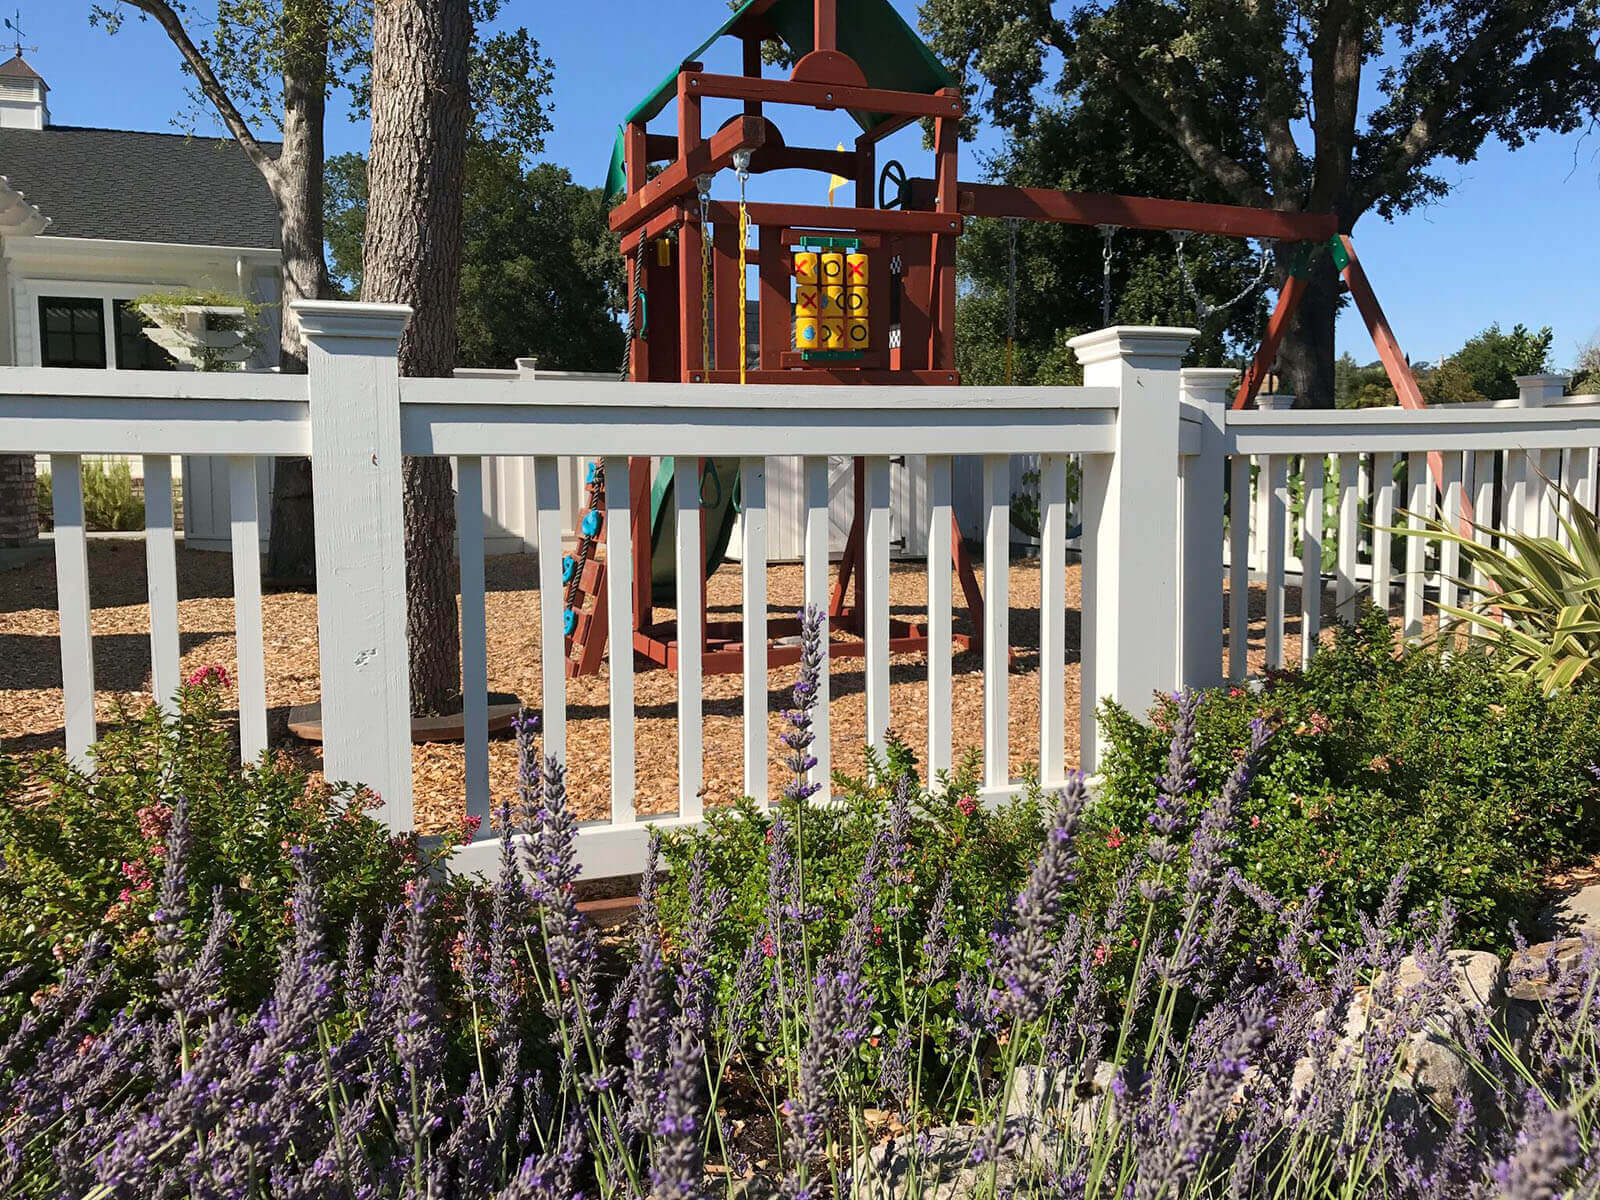 mulch covered play area with tall trees, a full jungle gym (with tic-tac-toe!) and swing set surrounded with white slat fencing and square topped fence posts, with lavender and shrubery outside